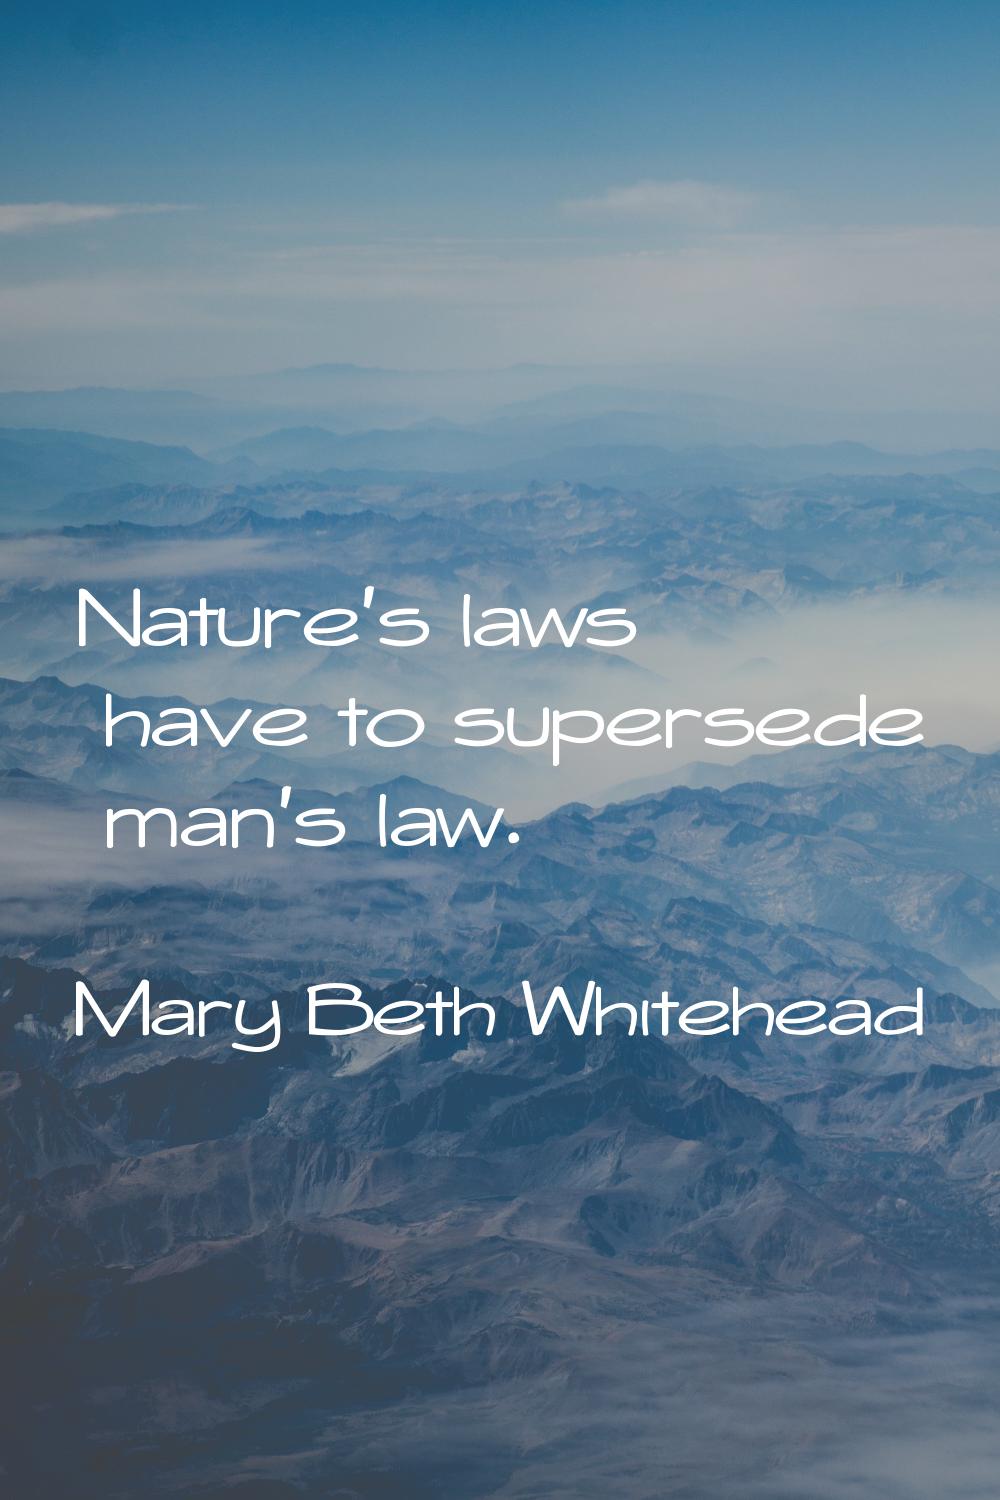 Nature's laws have to supersede man's law.